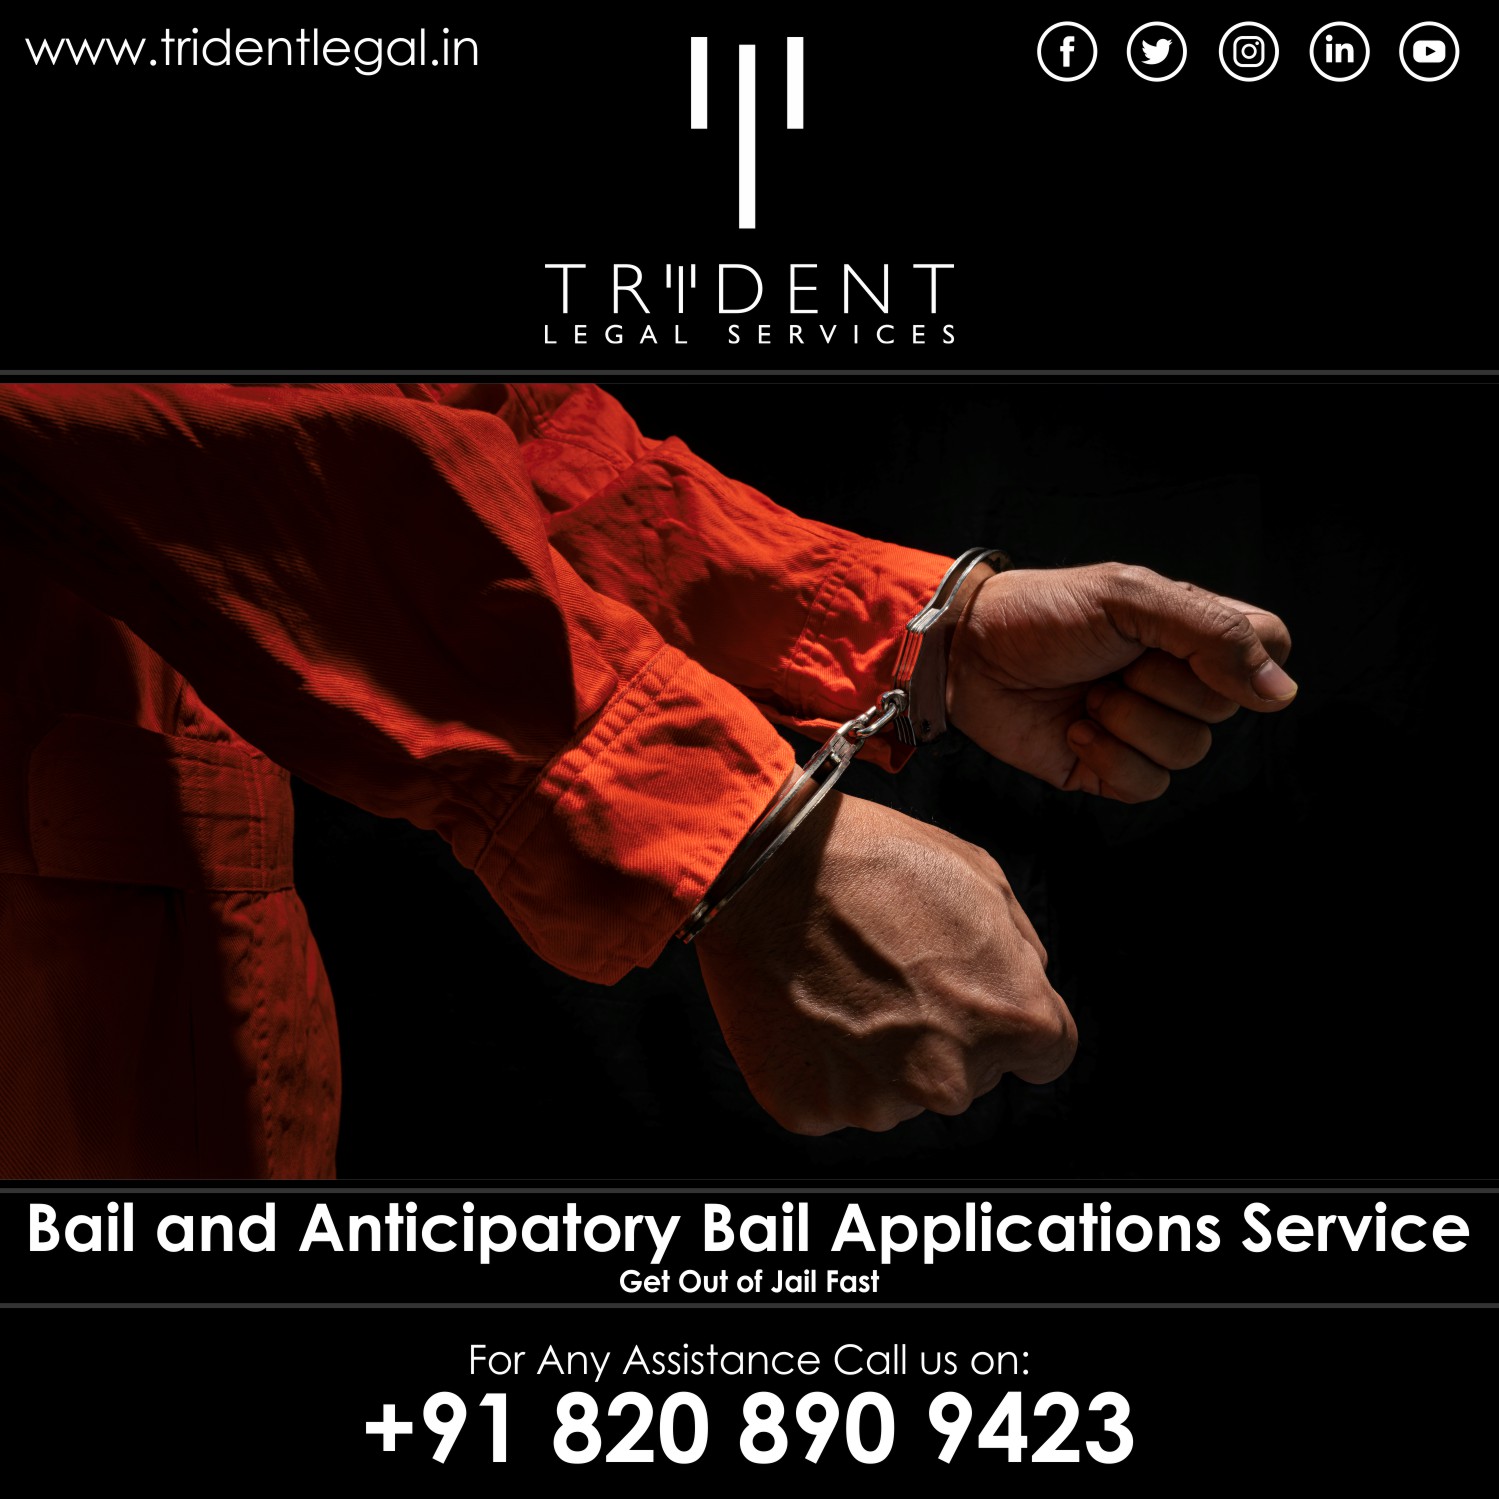 Bail And Anticipatory Bail Applications Service in Pune